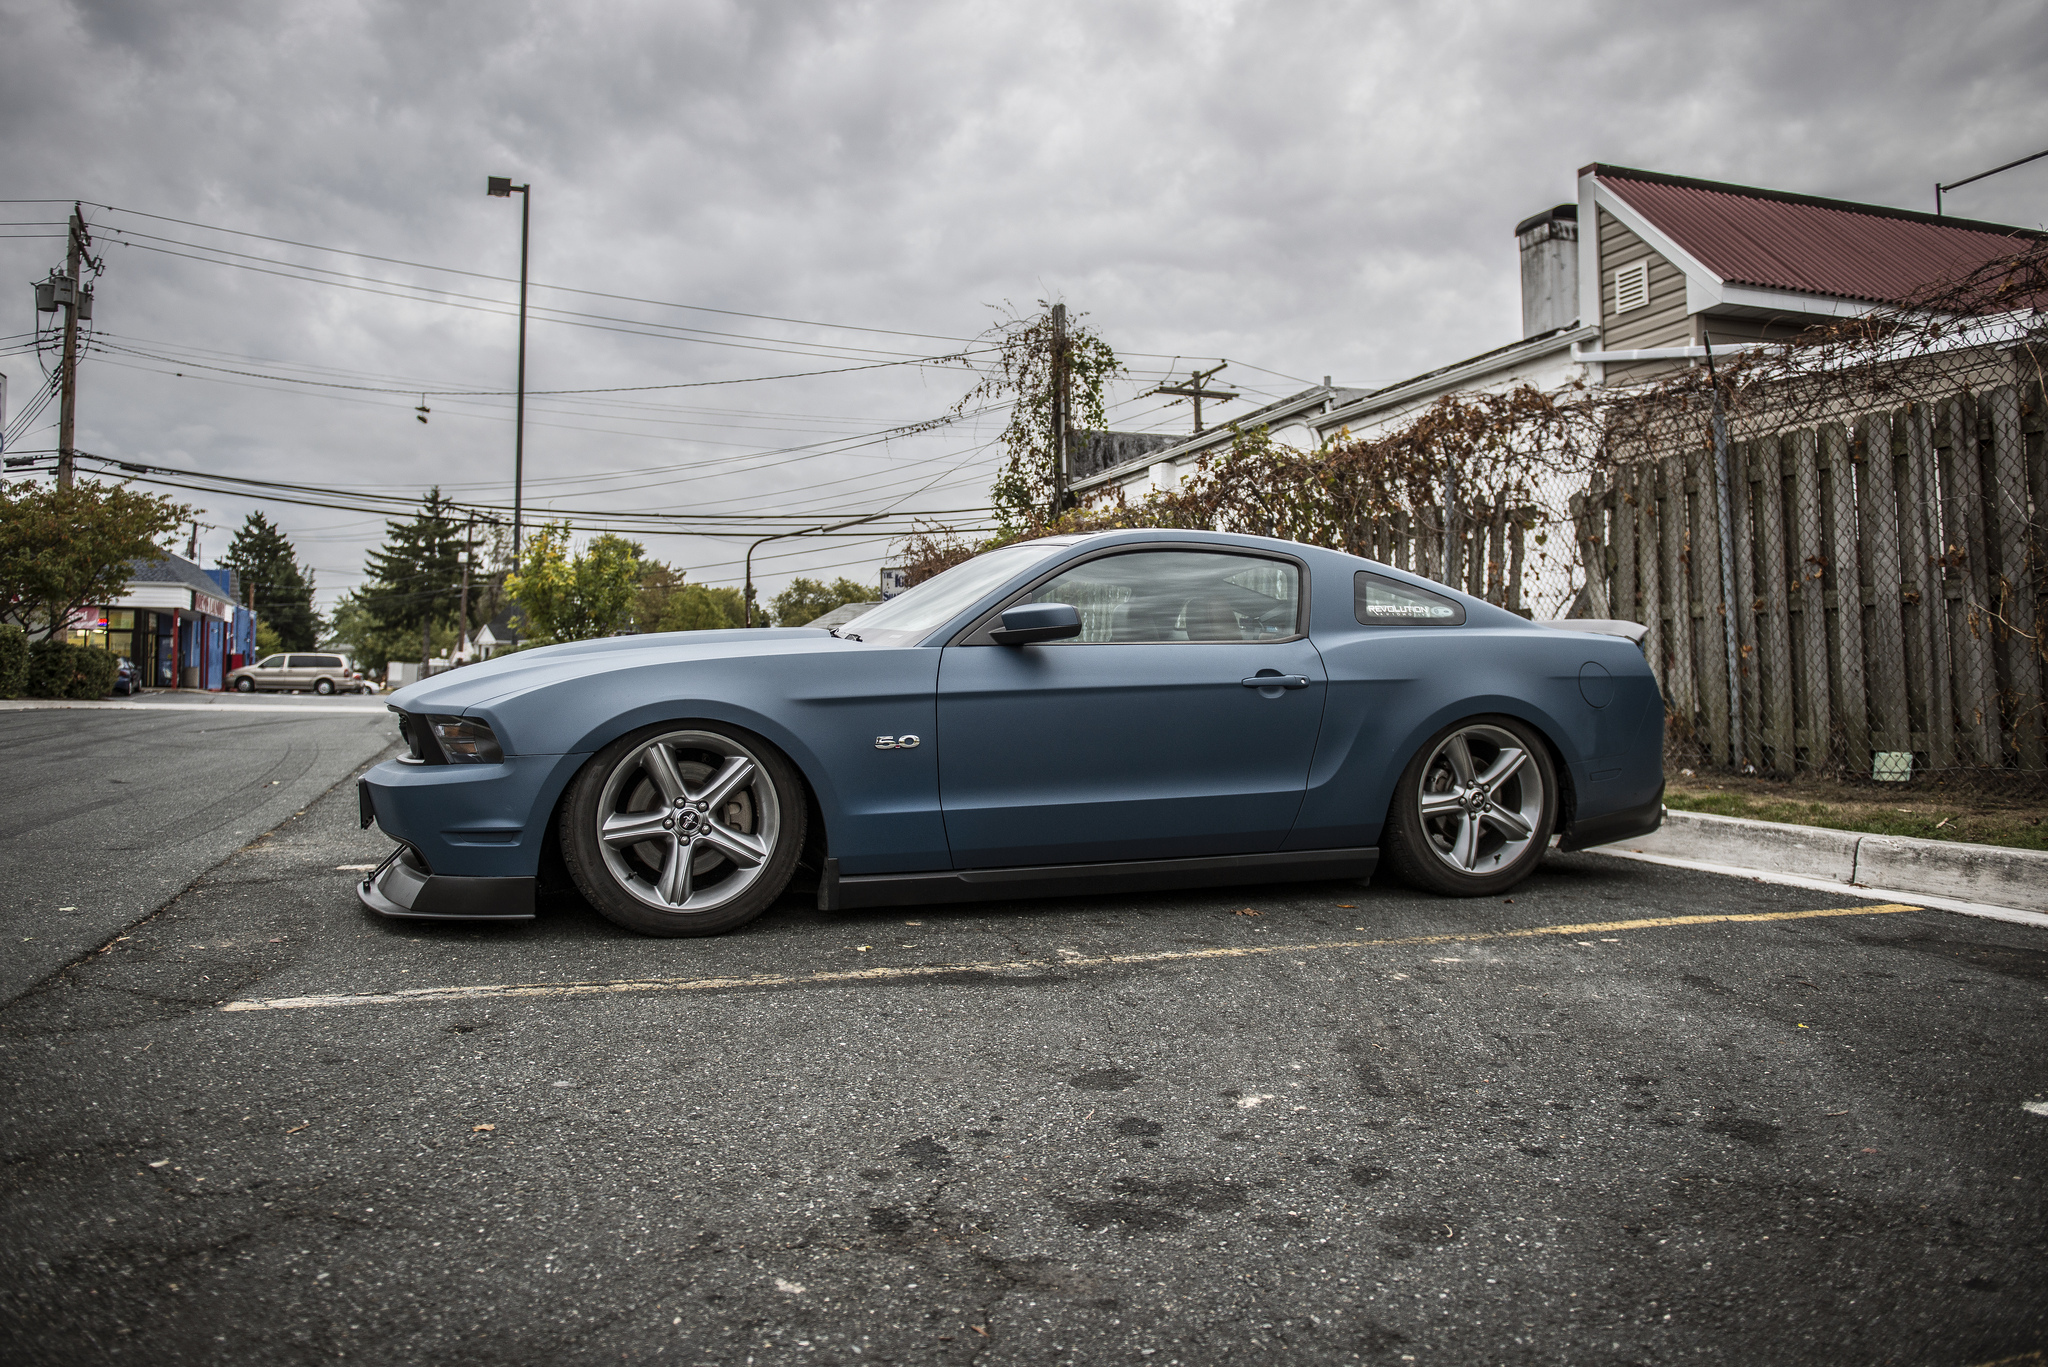 General 2048x1367 Ford Mustang muscle cars tuning car vehicle blue cars urban Ford Mustang S-197 II Ford American cars